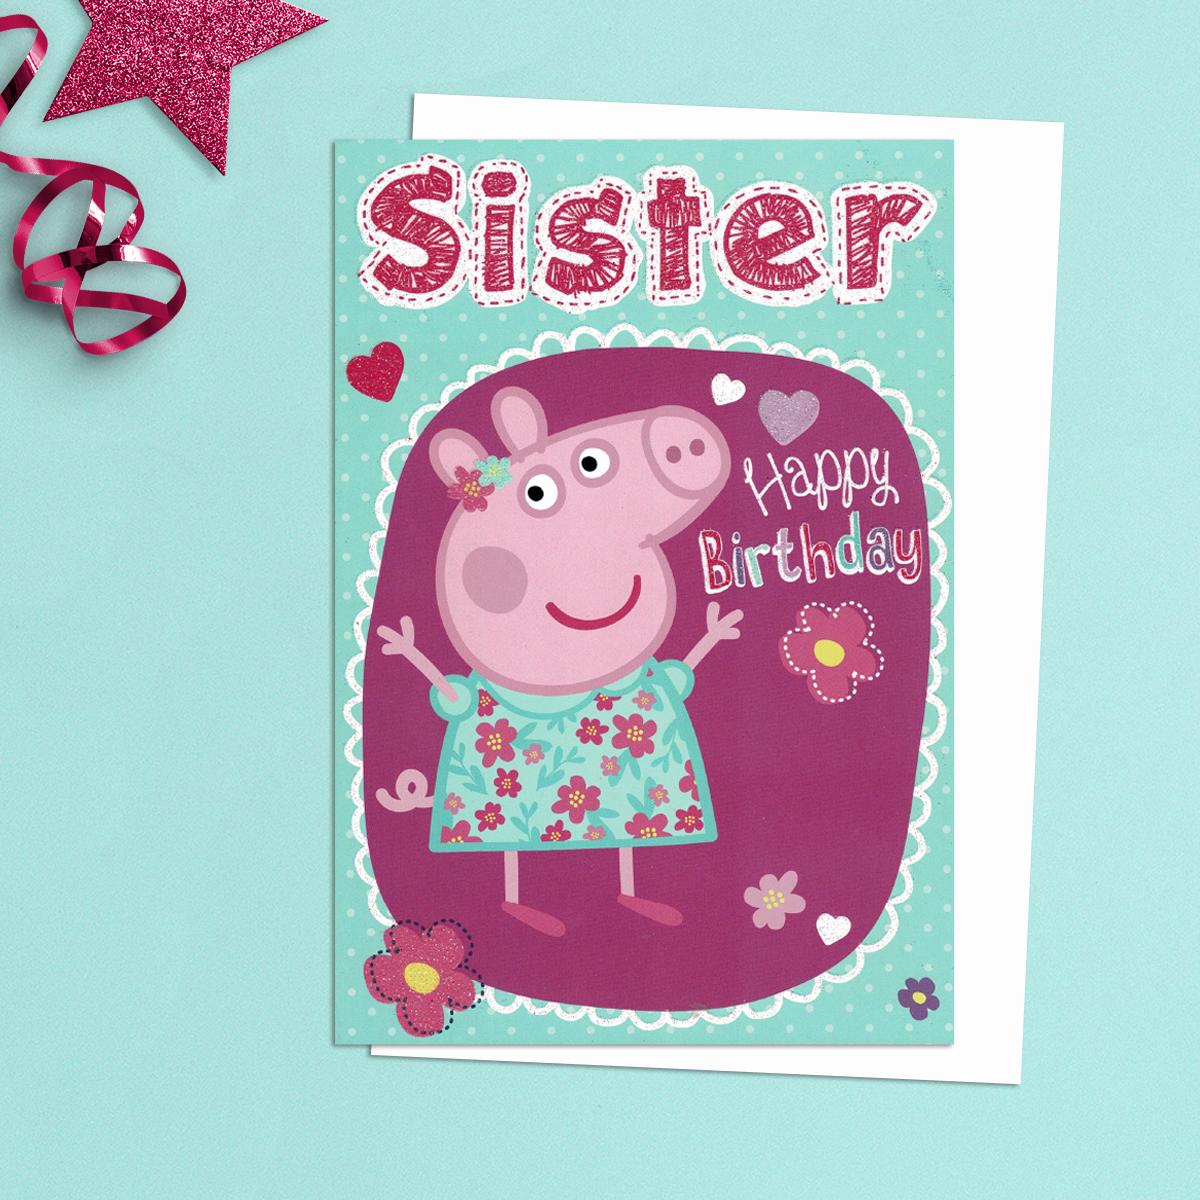 Sister Happy Birthday Card Featuring Peppa Piig. With White Envelope